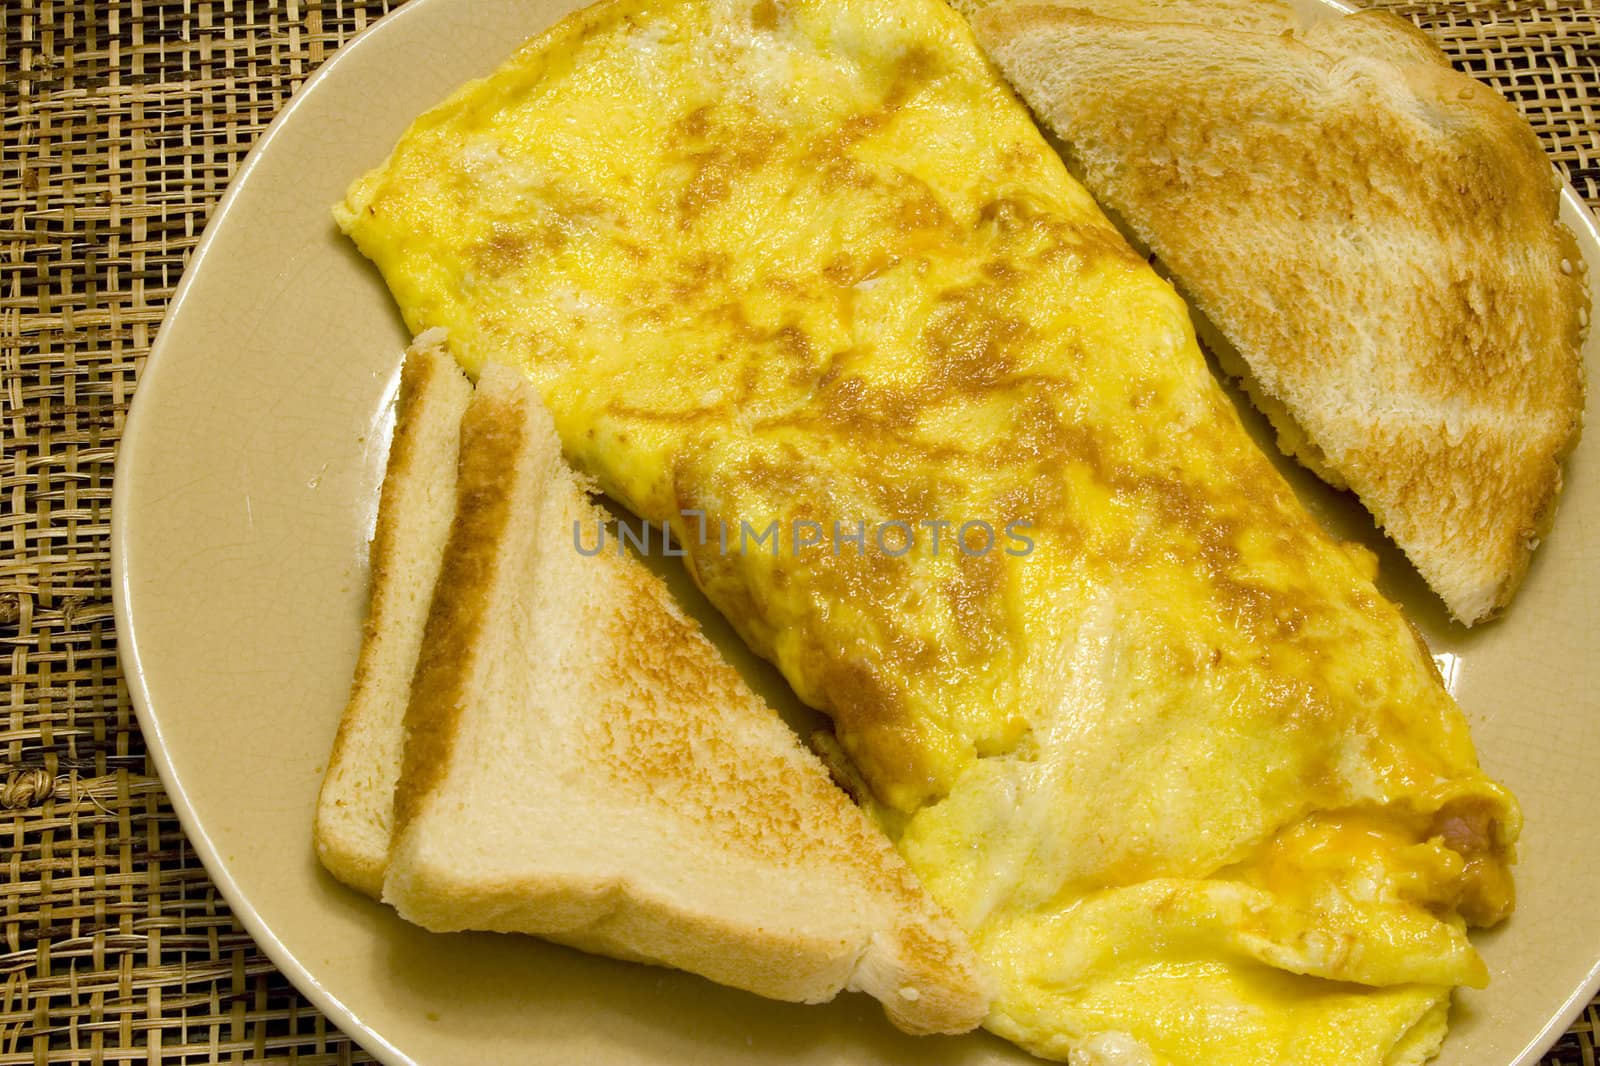 Omelette and white toast on a tan plate on a wicker placemat